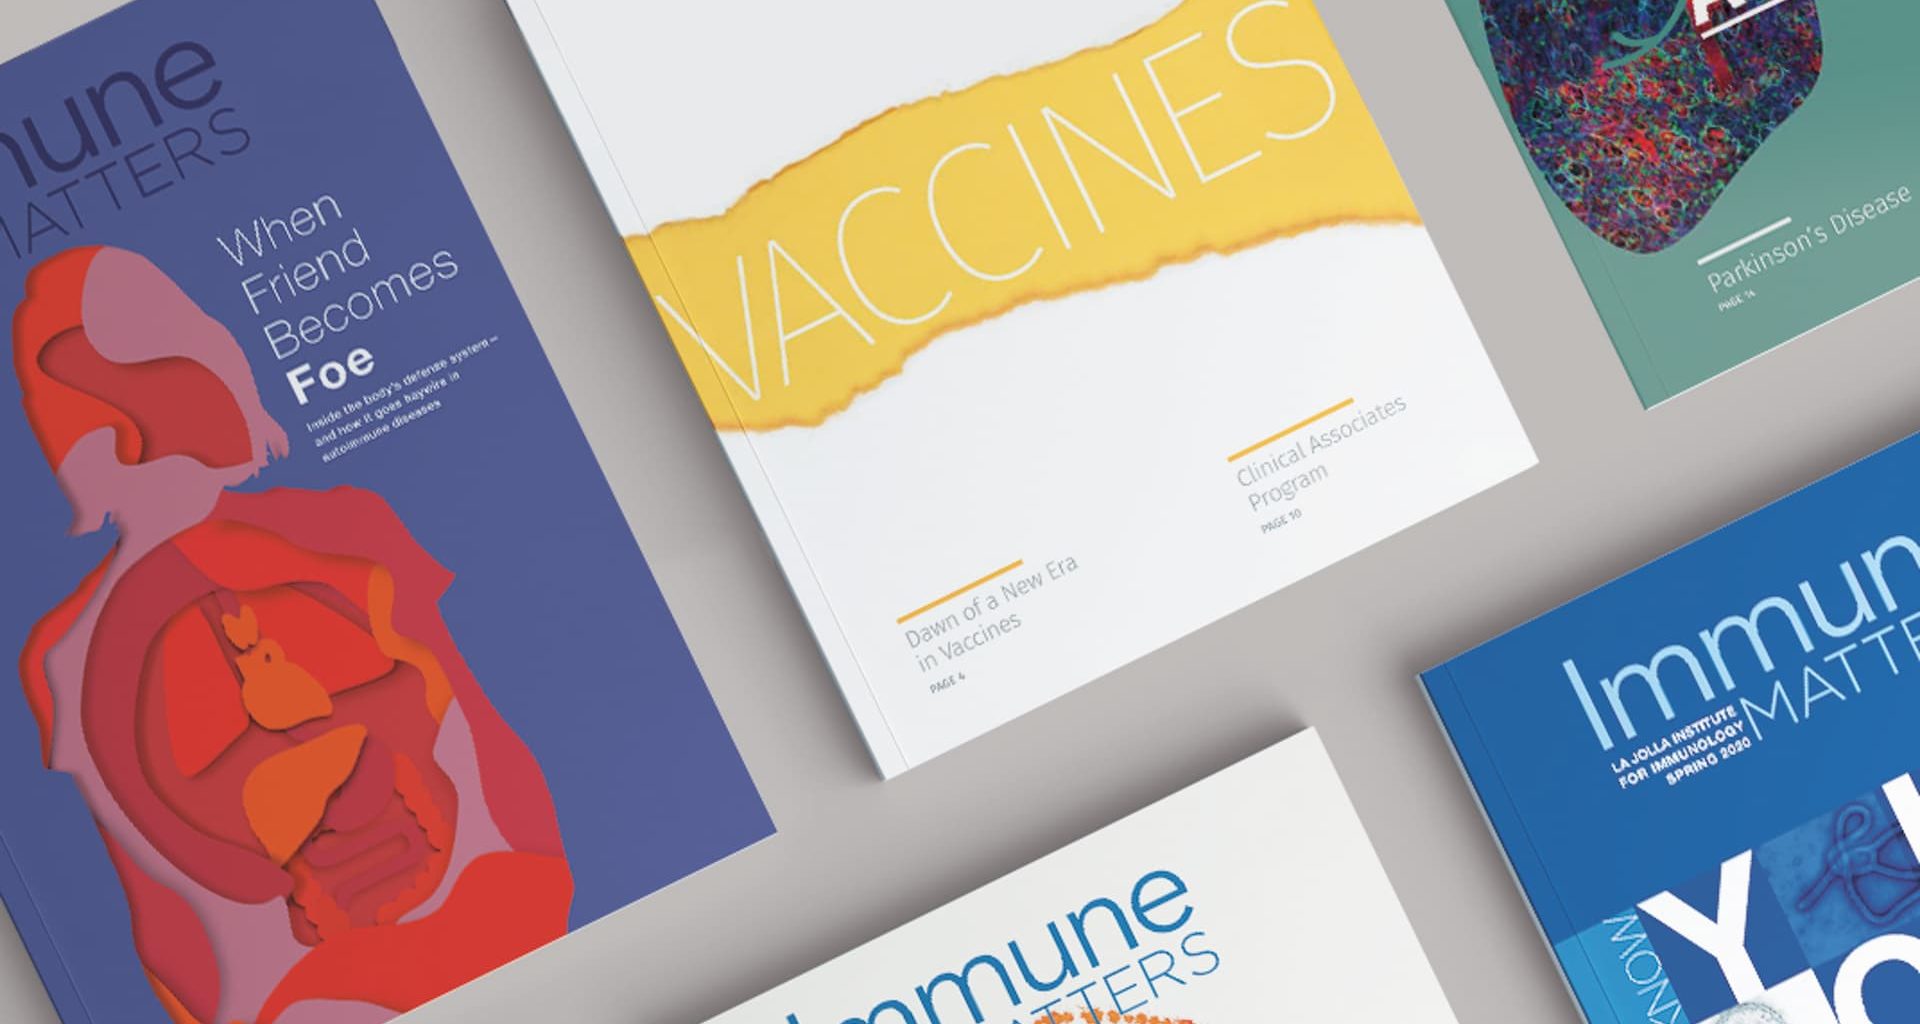 Collage of multiple Immune Matters magazine covers